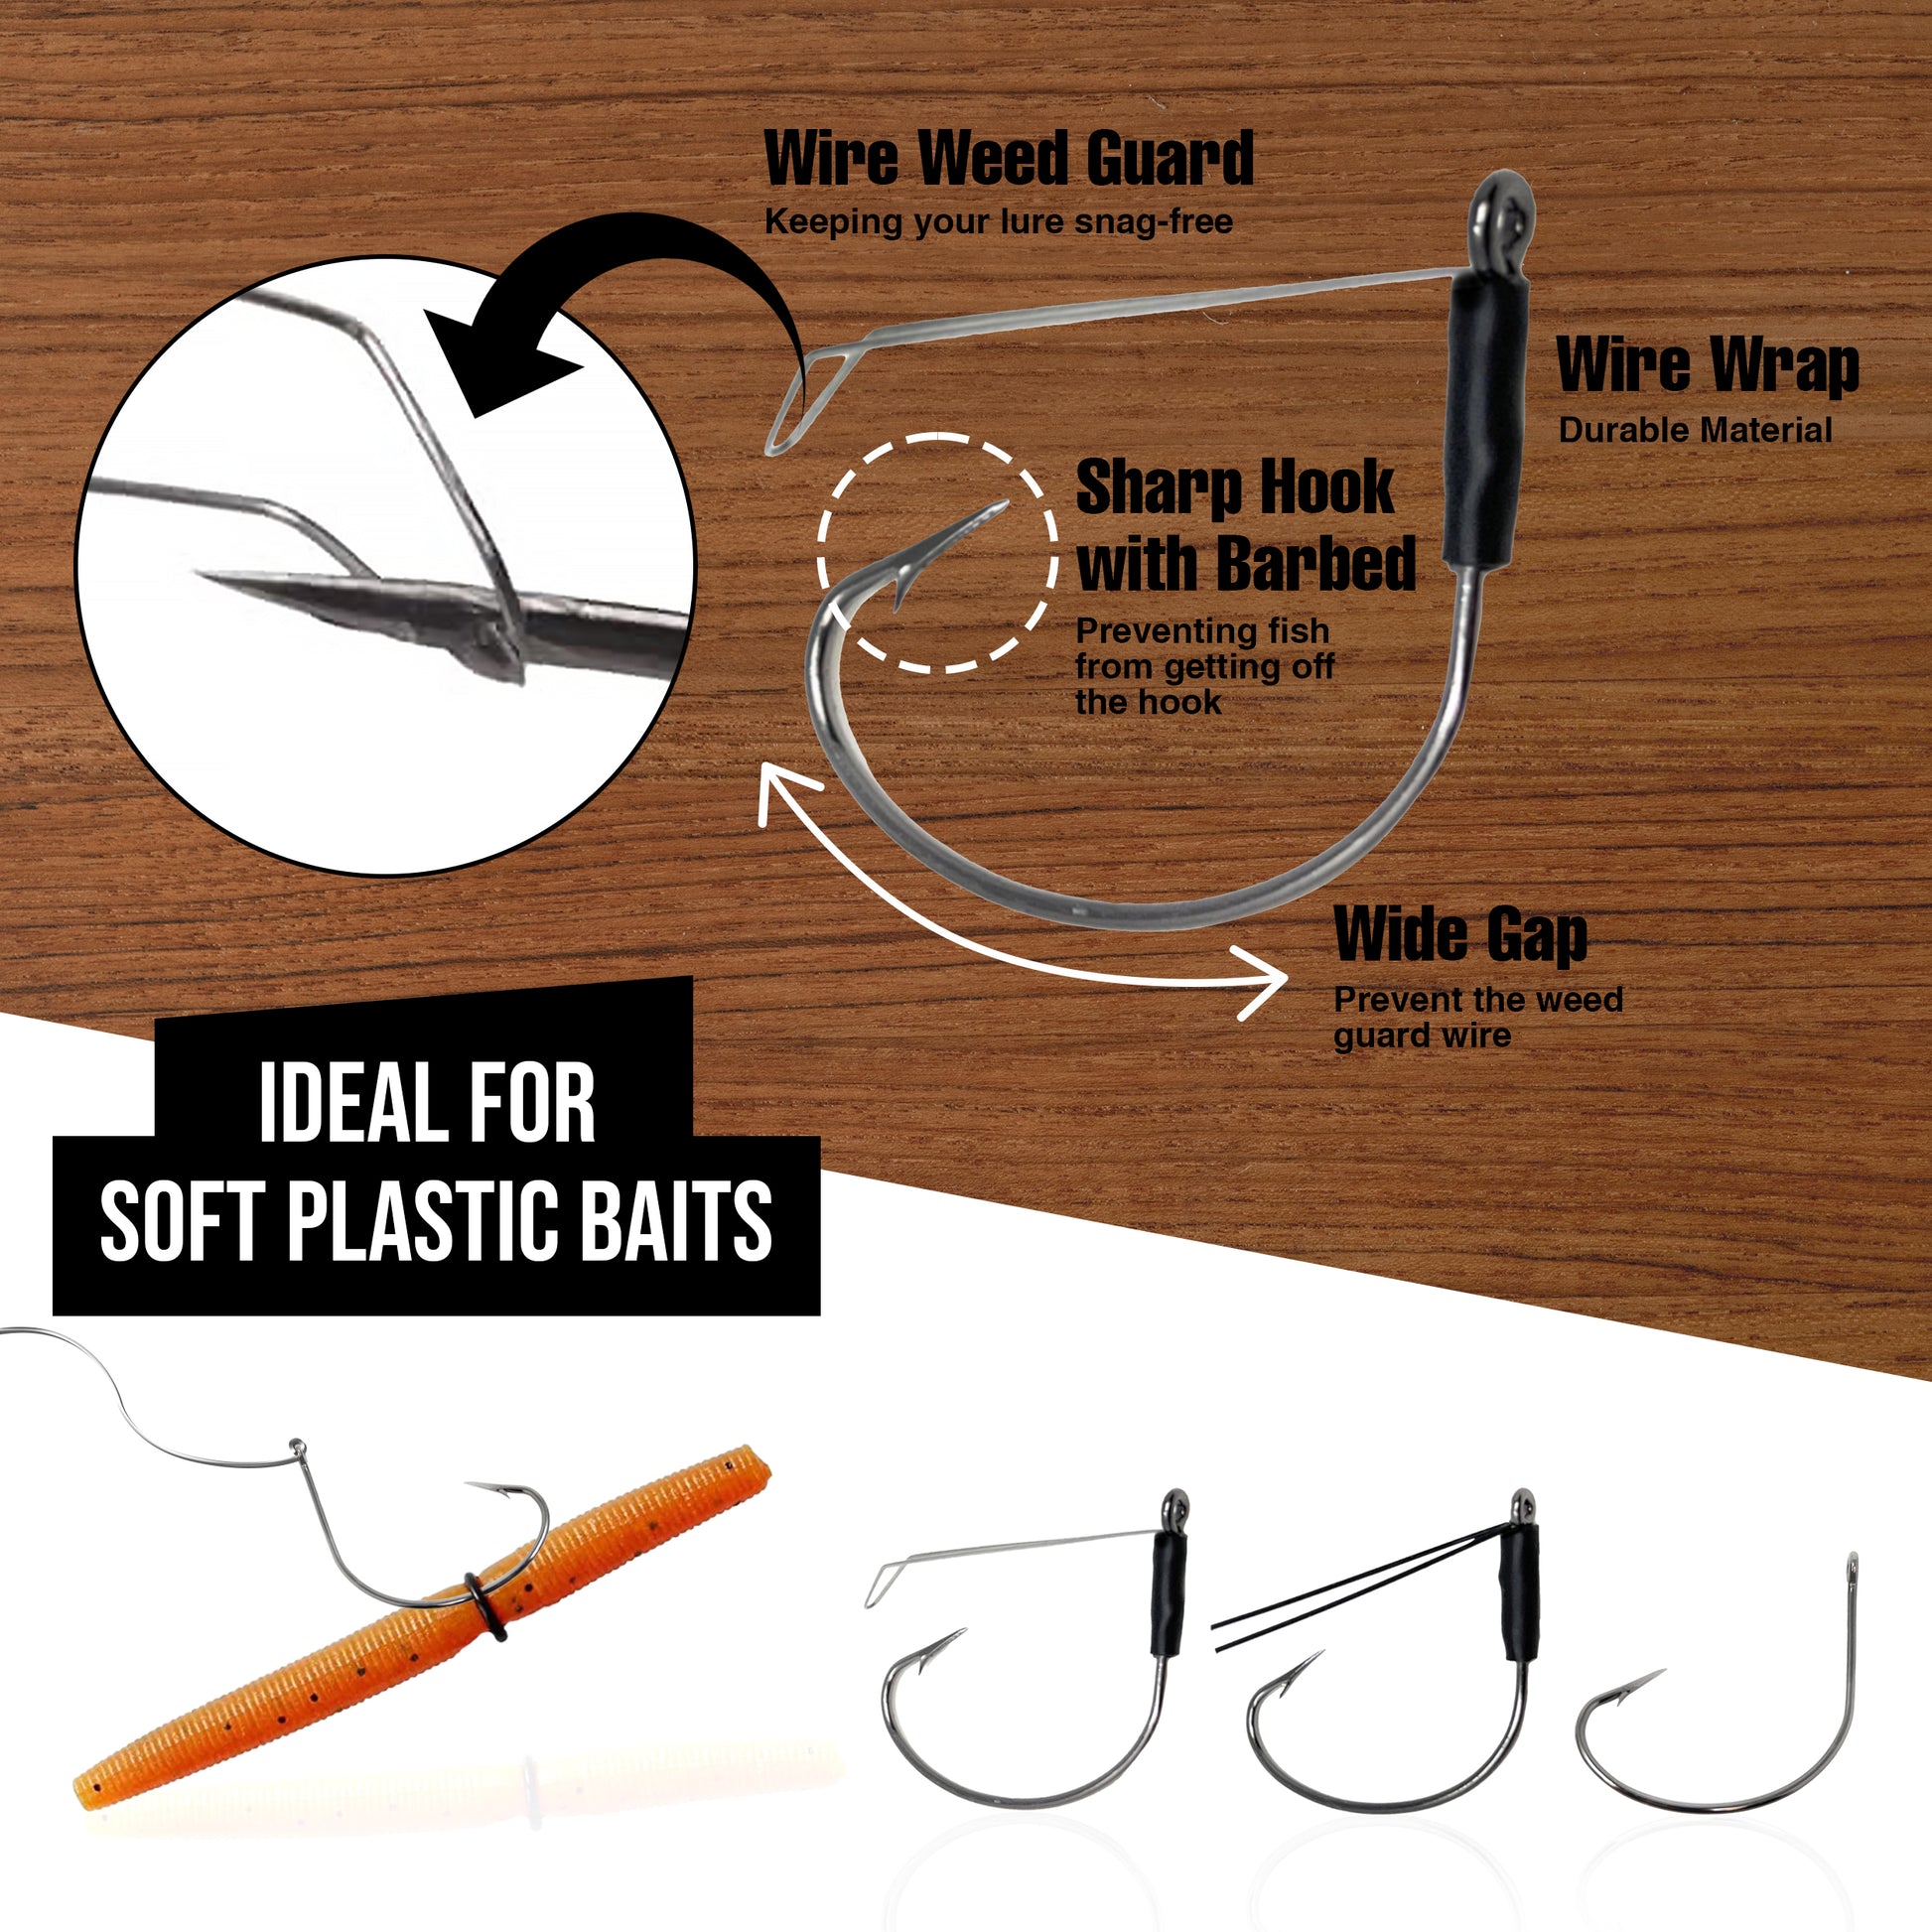 Weedless Wacky Worm Hooks,Wacky Worm Hooks Carbon Steel Fishing 20 pcs Wacky  Rig Fishing Hooks with Weed Guard Stainless Steel Wide Gap Hooks for Bass  Soft Worm Baits Size 2/0 : 